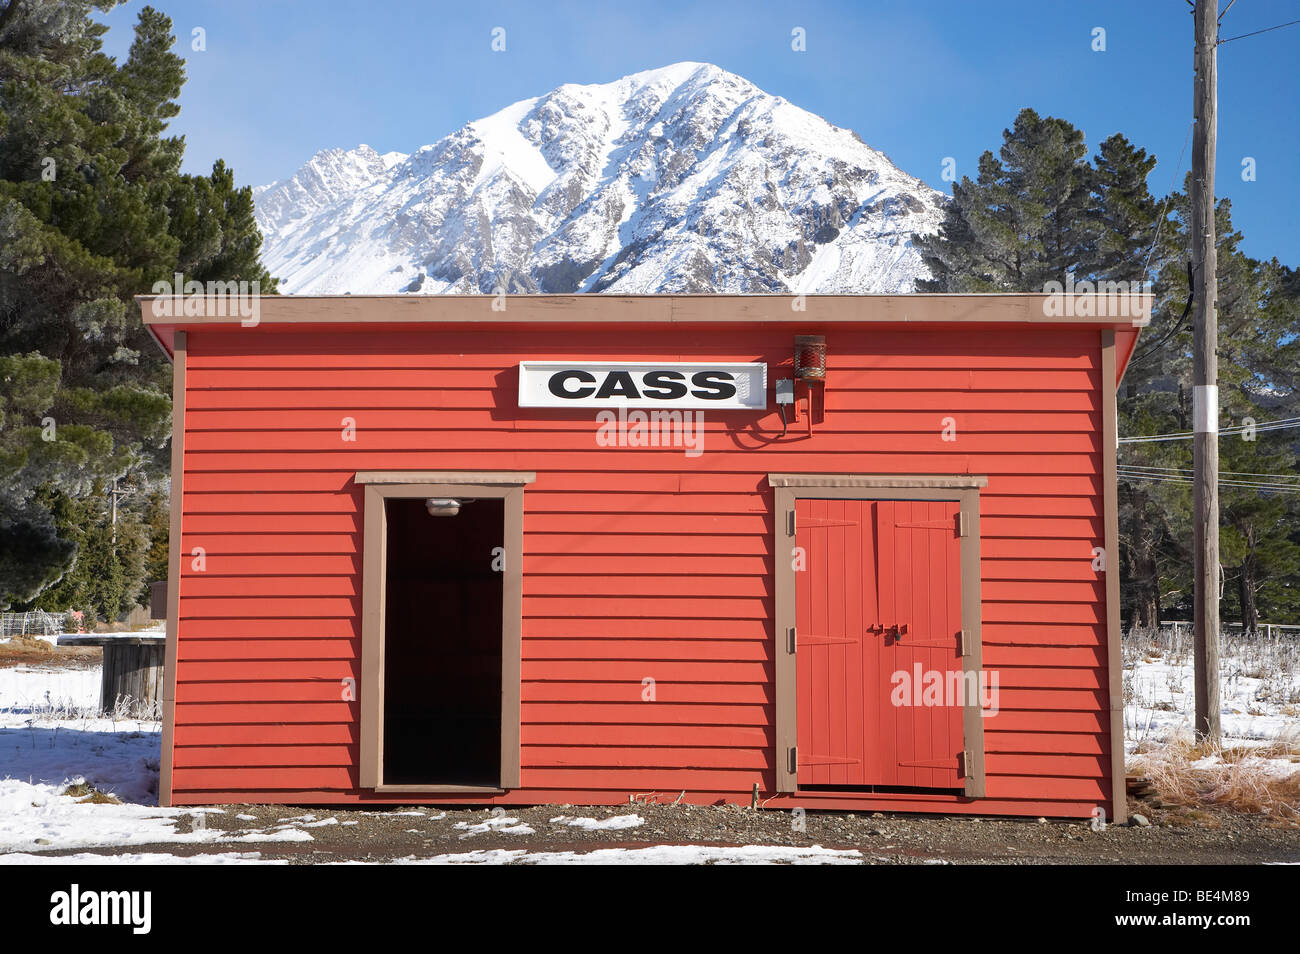 Cass Railway Station, Arthur's Pass Road, and Mt Misery, Canterbury, South Island, New Zealand Stock Photo